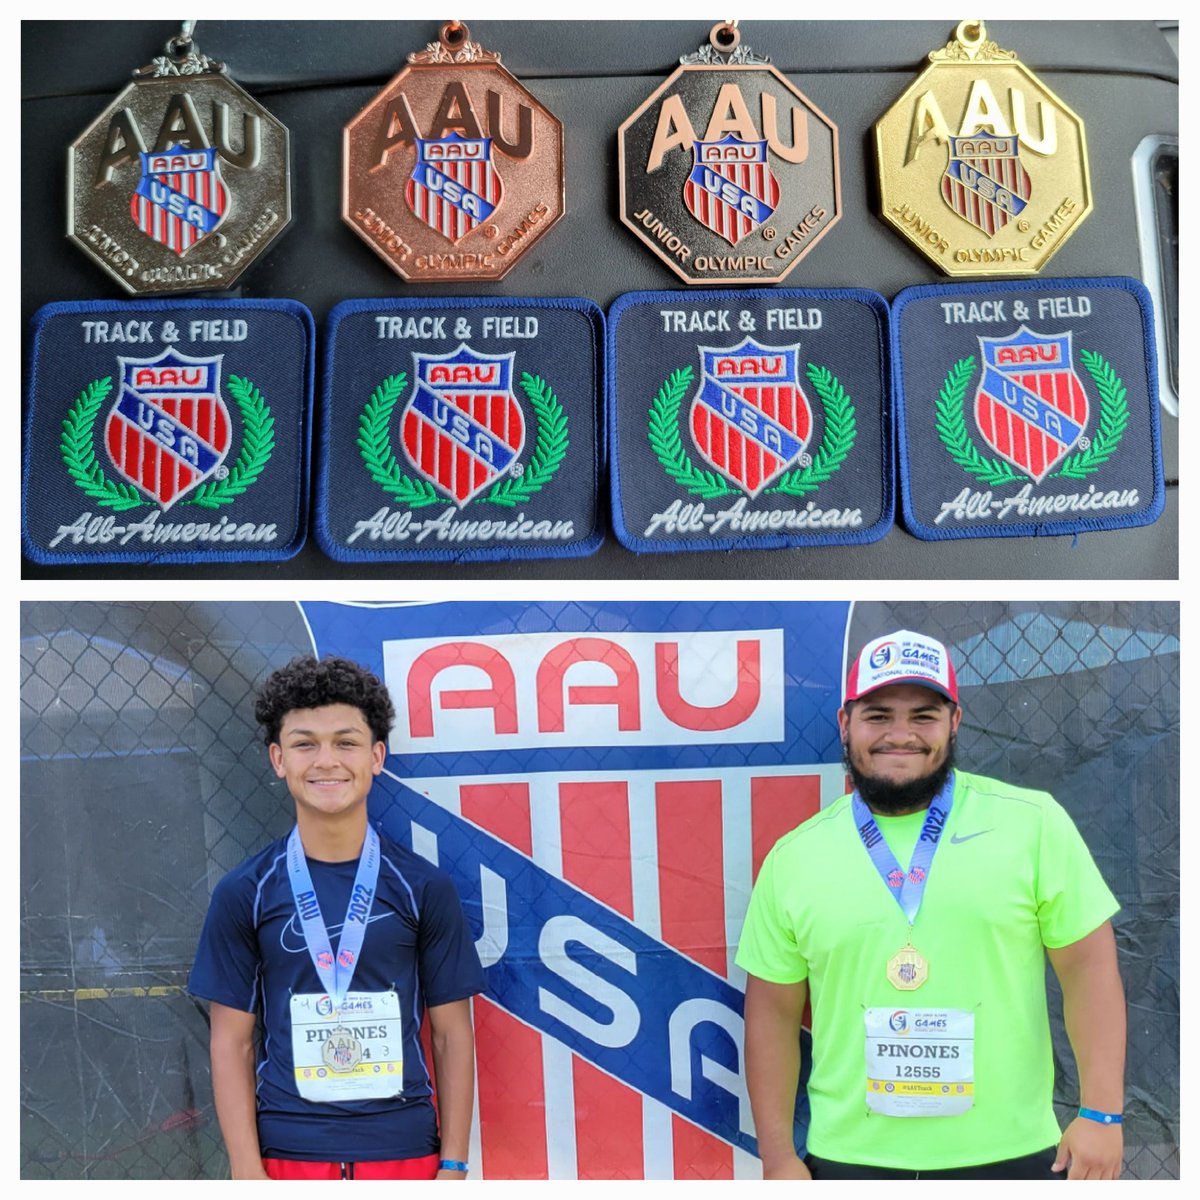 Junior Olympics was good to the Pinones brothers. Boys managed to add some bling to the collection and add some All American patches.I love that the Pinones brothers have such a passion for throwing,not to mention doing it together.🙏
#blessedyoucallmemom #Shotanddiscusmom 
#EC